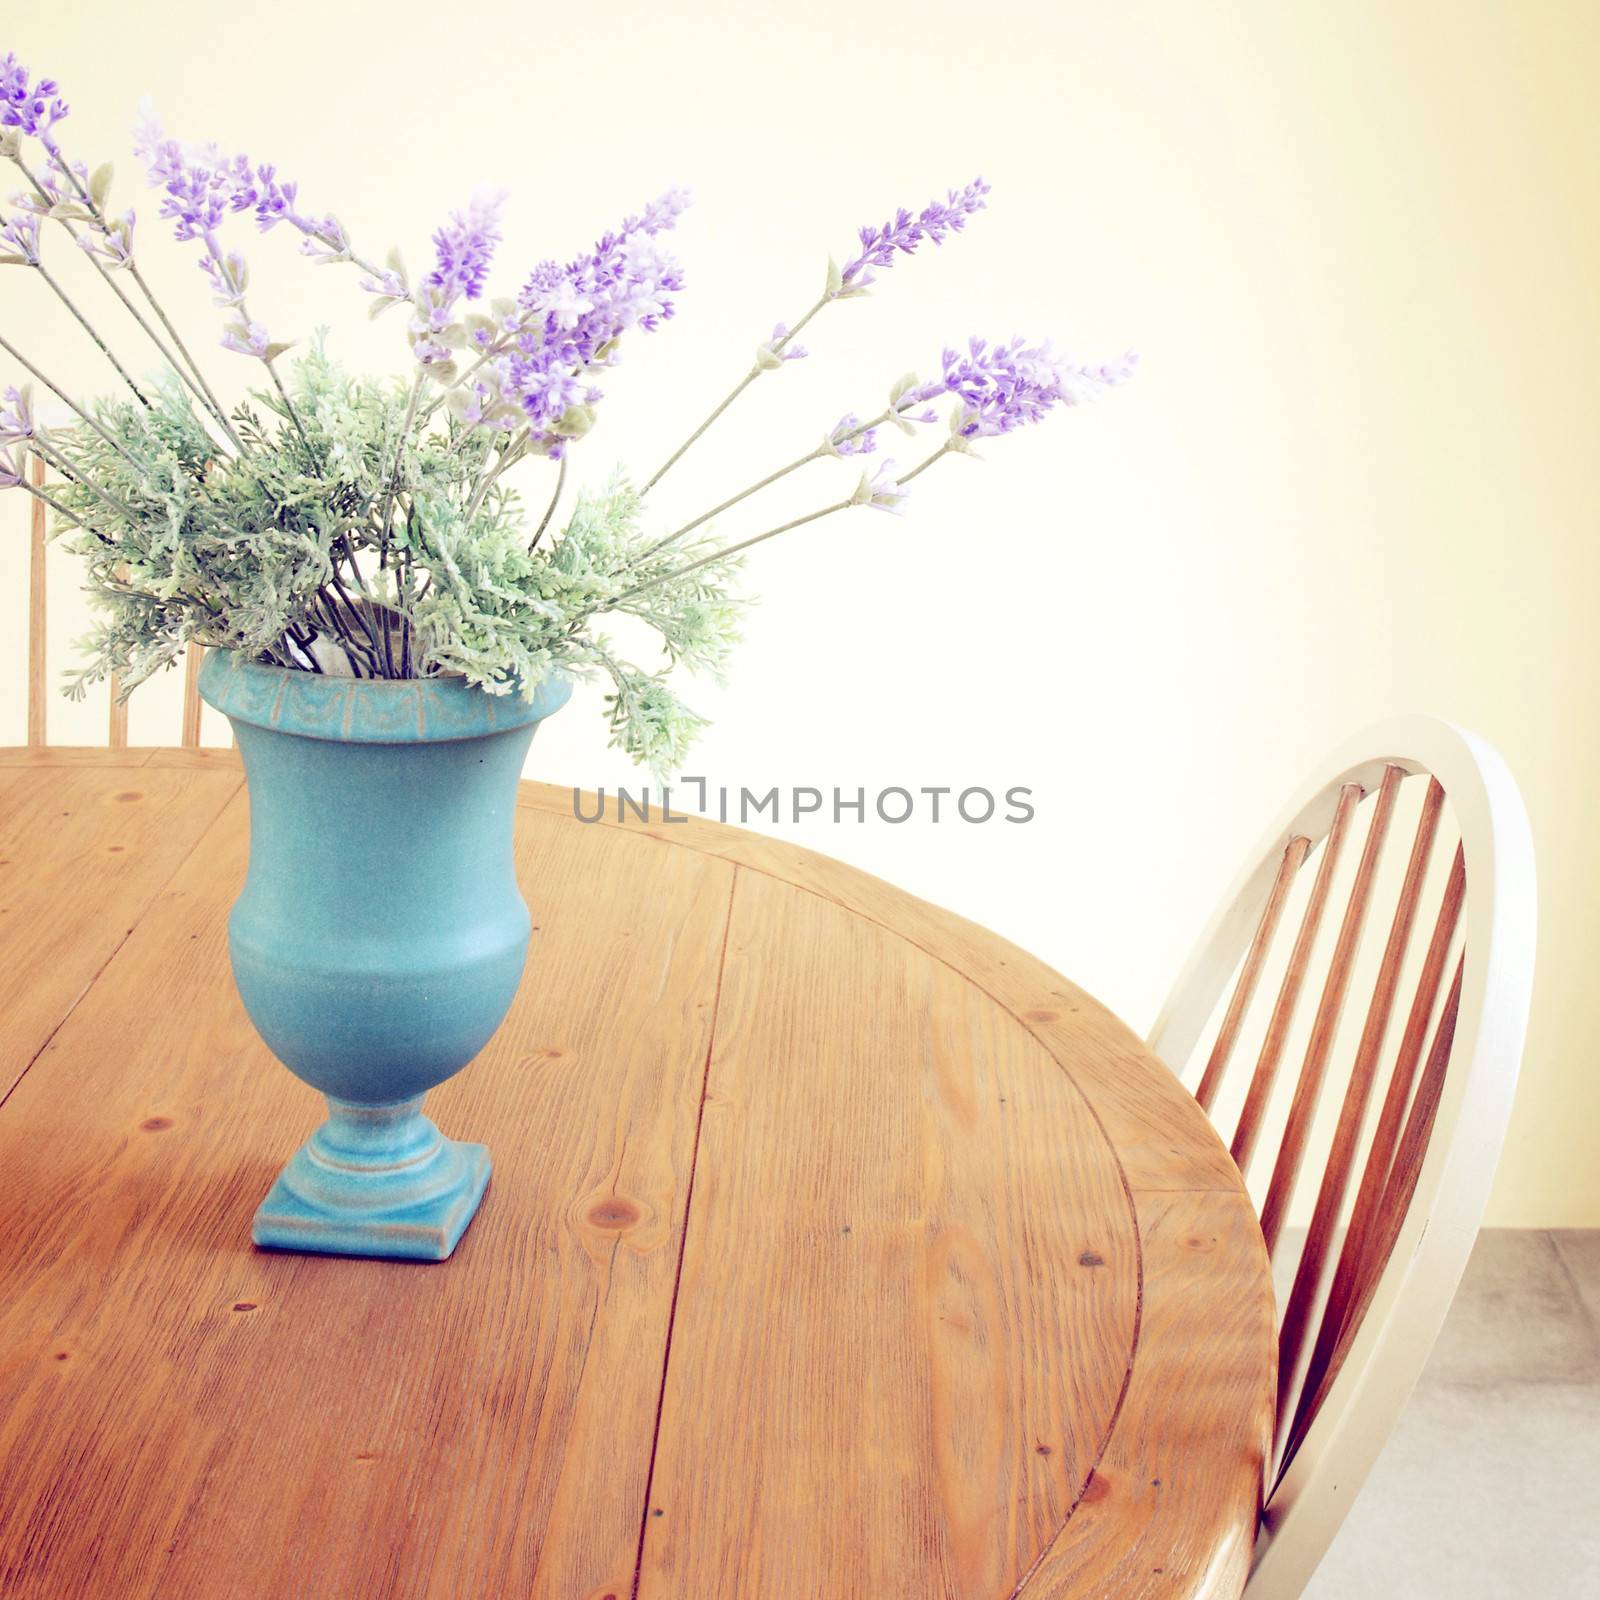 Flowers in vase on the table with retro filter effect by nuchylee